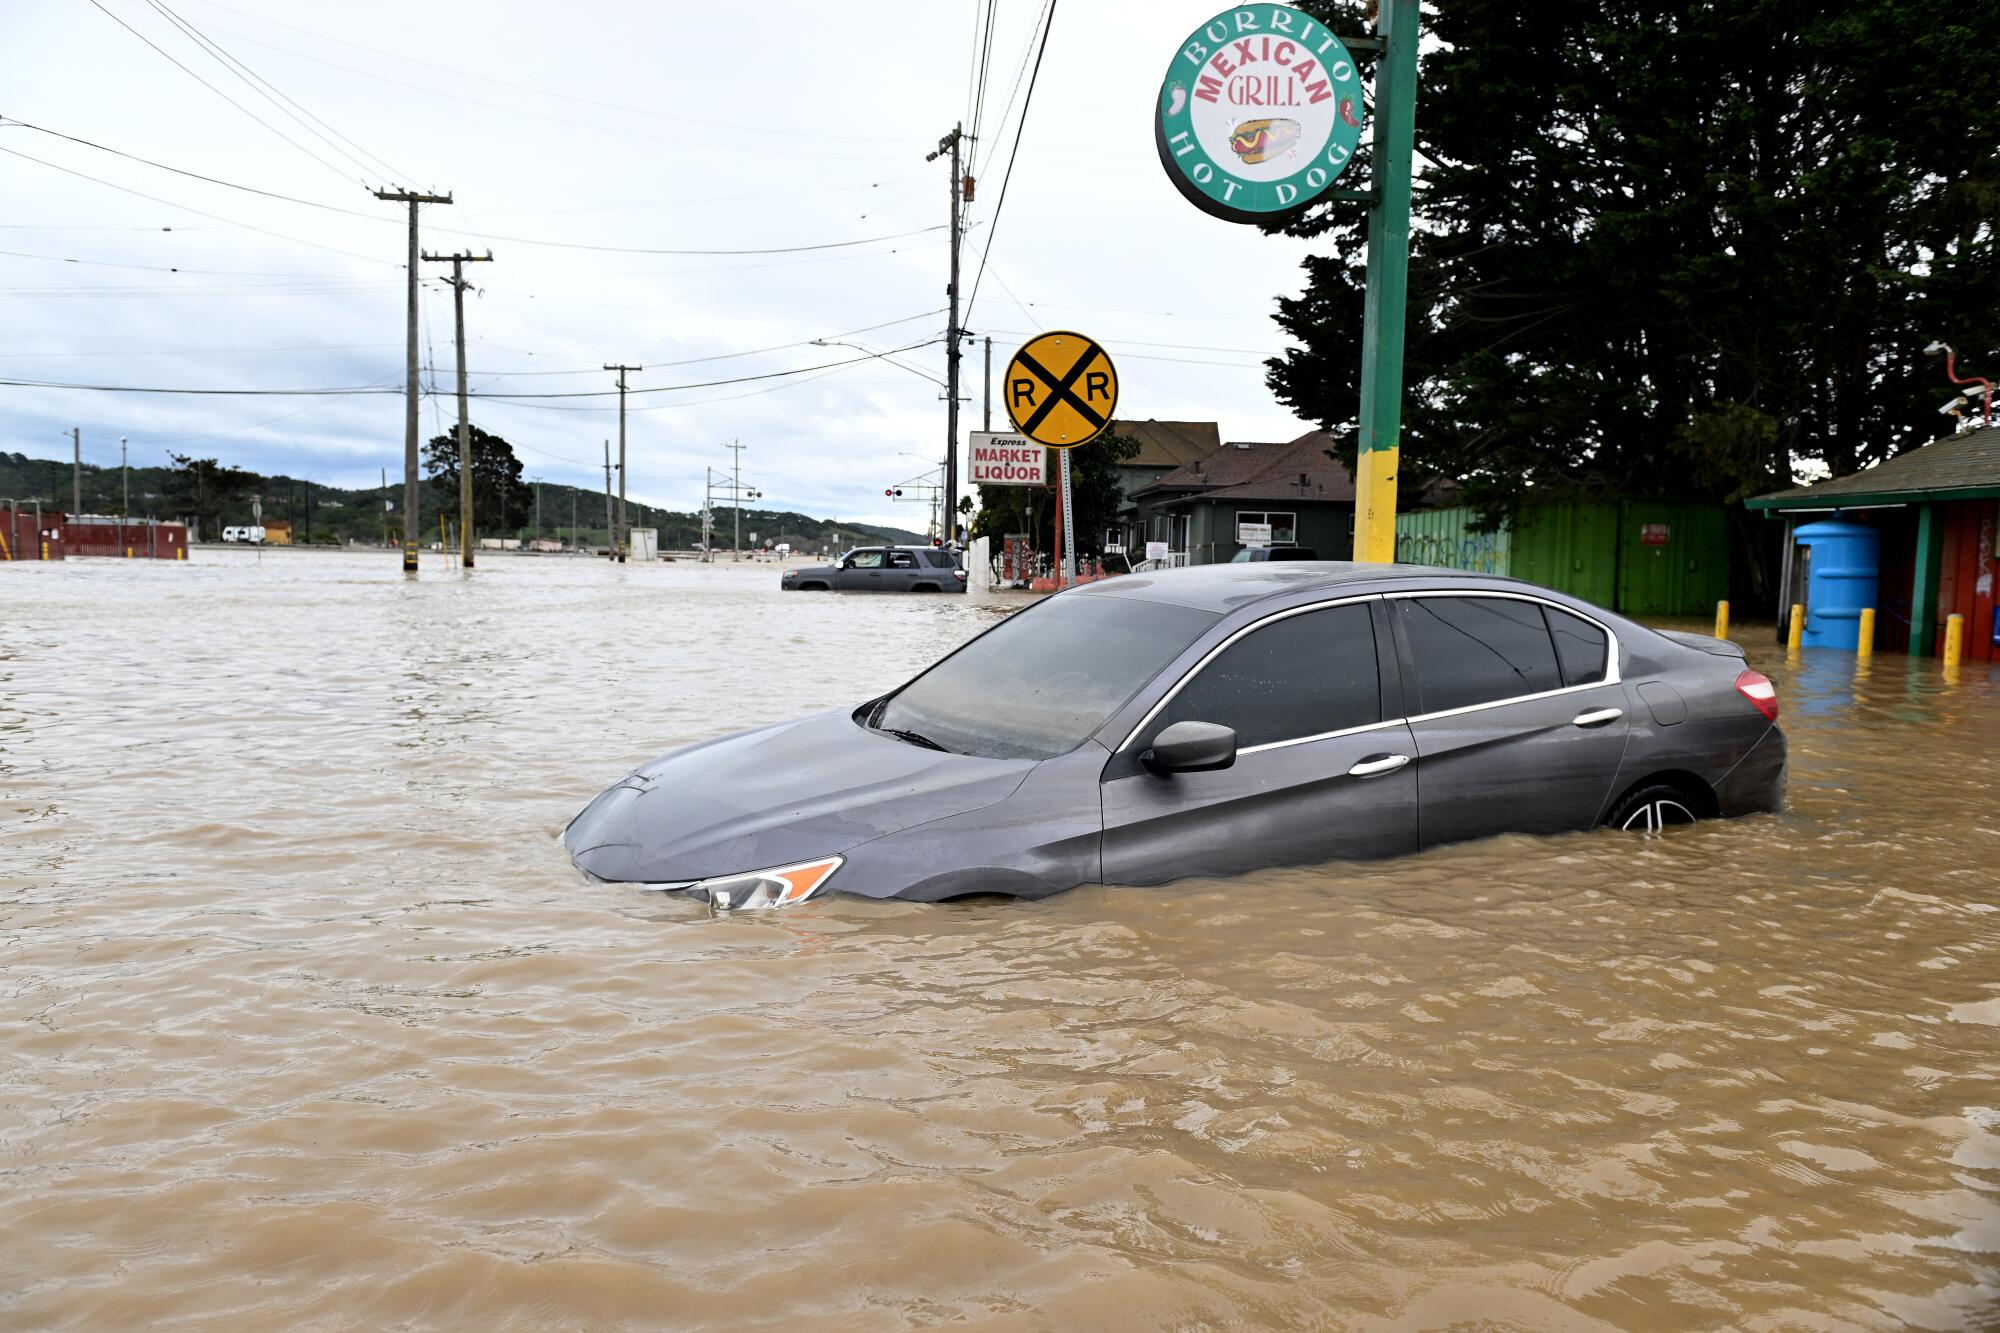 A car sits half submerged in muddy floodwater.